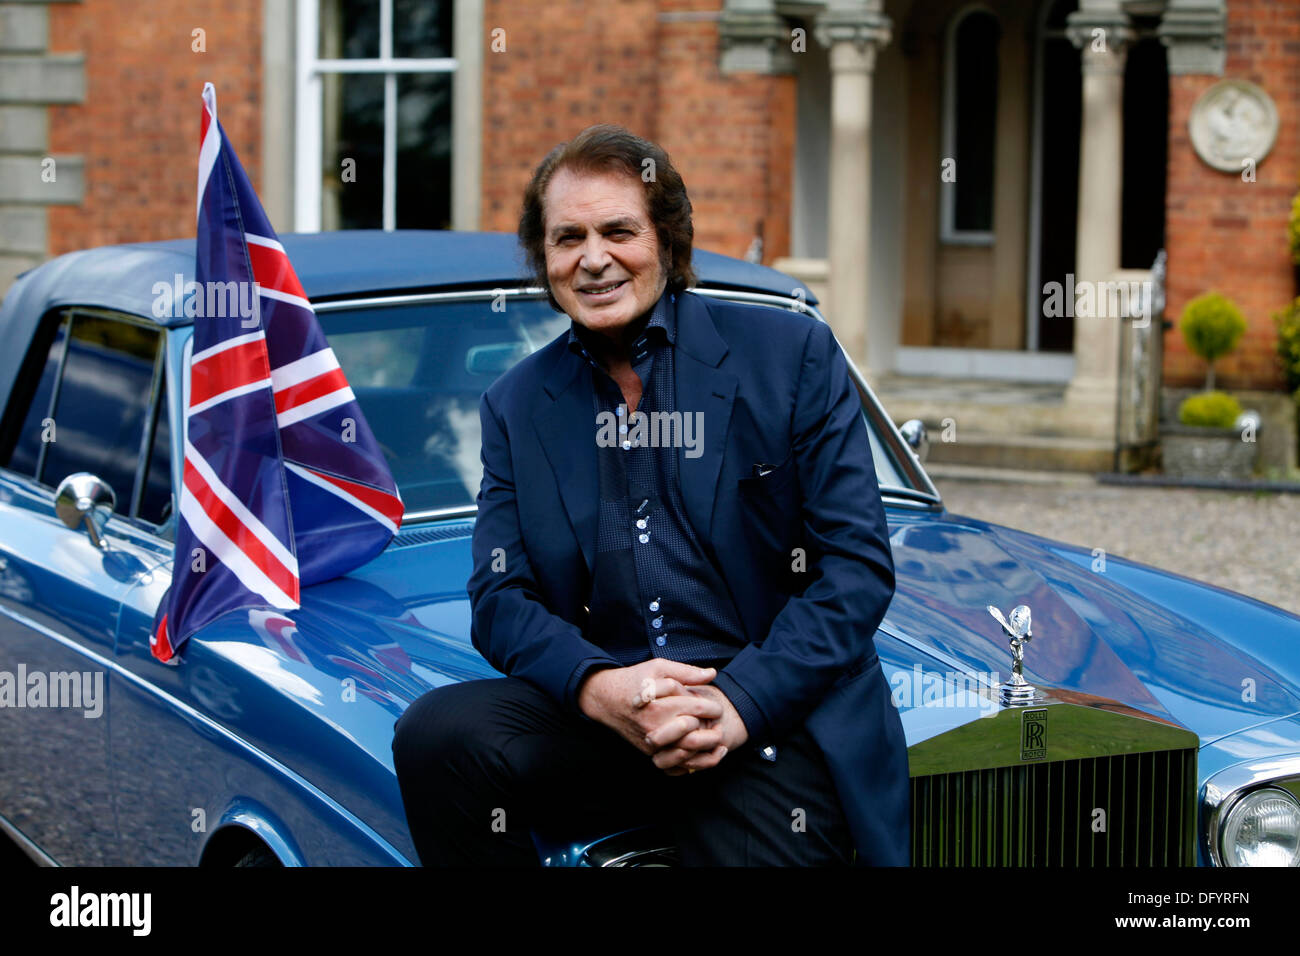 British pop singer Engelbert Humperdinck poses for a photograph next to his car and a Union Jack flag during a photocall Stock Photo